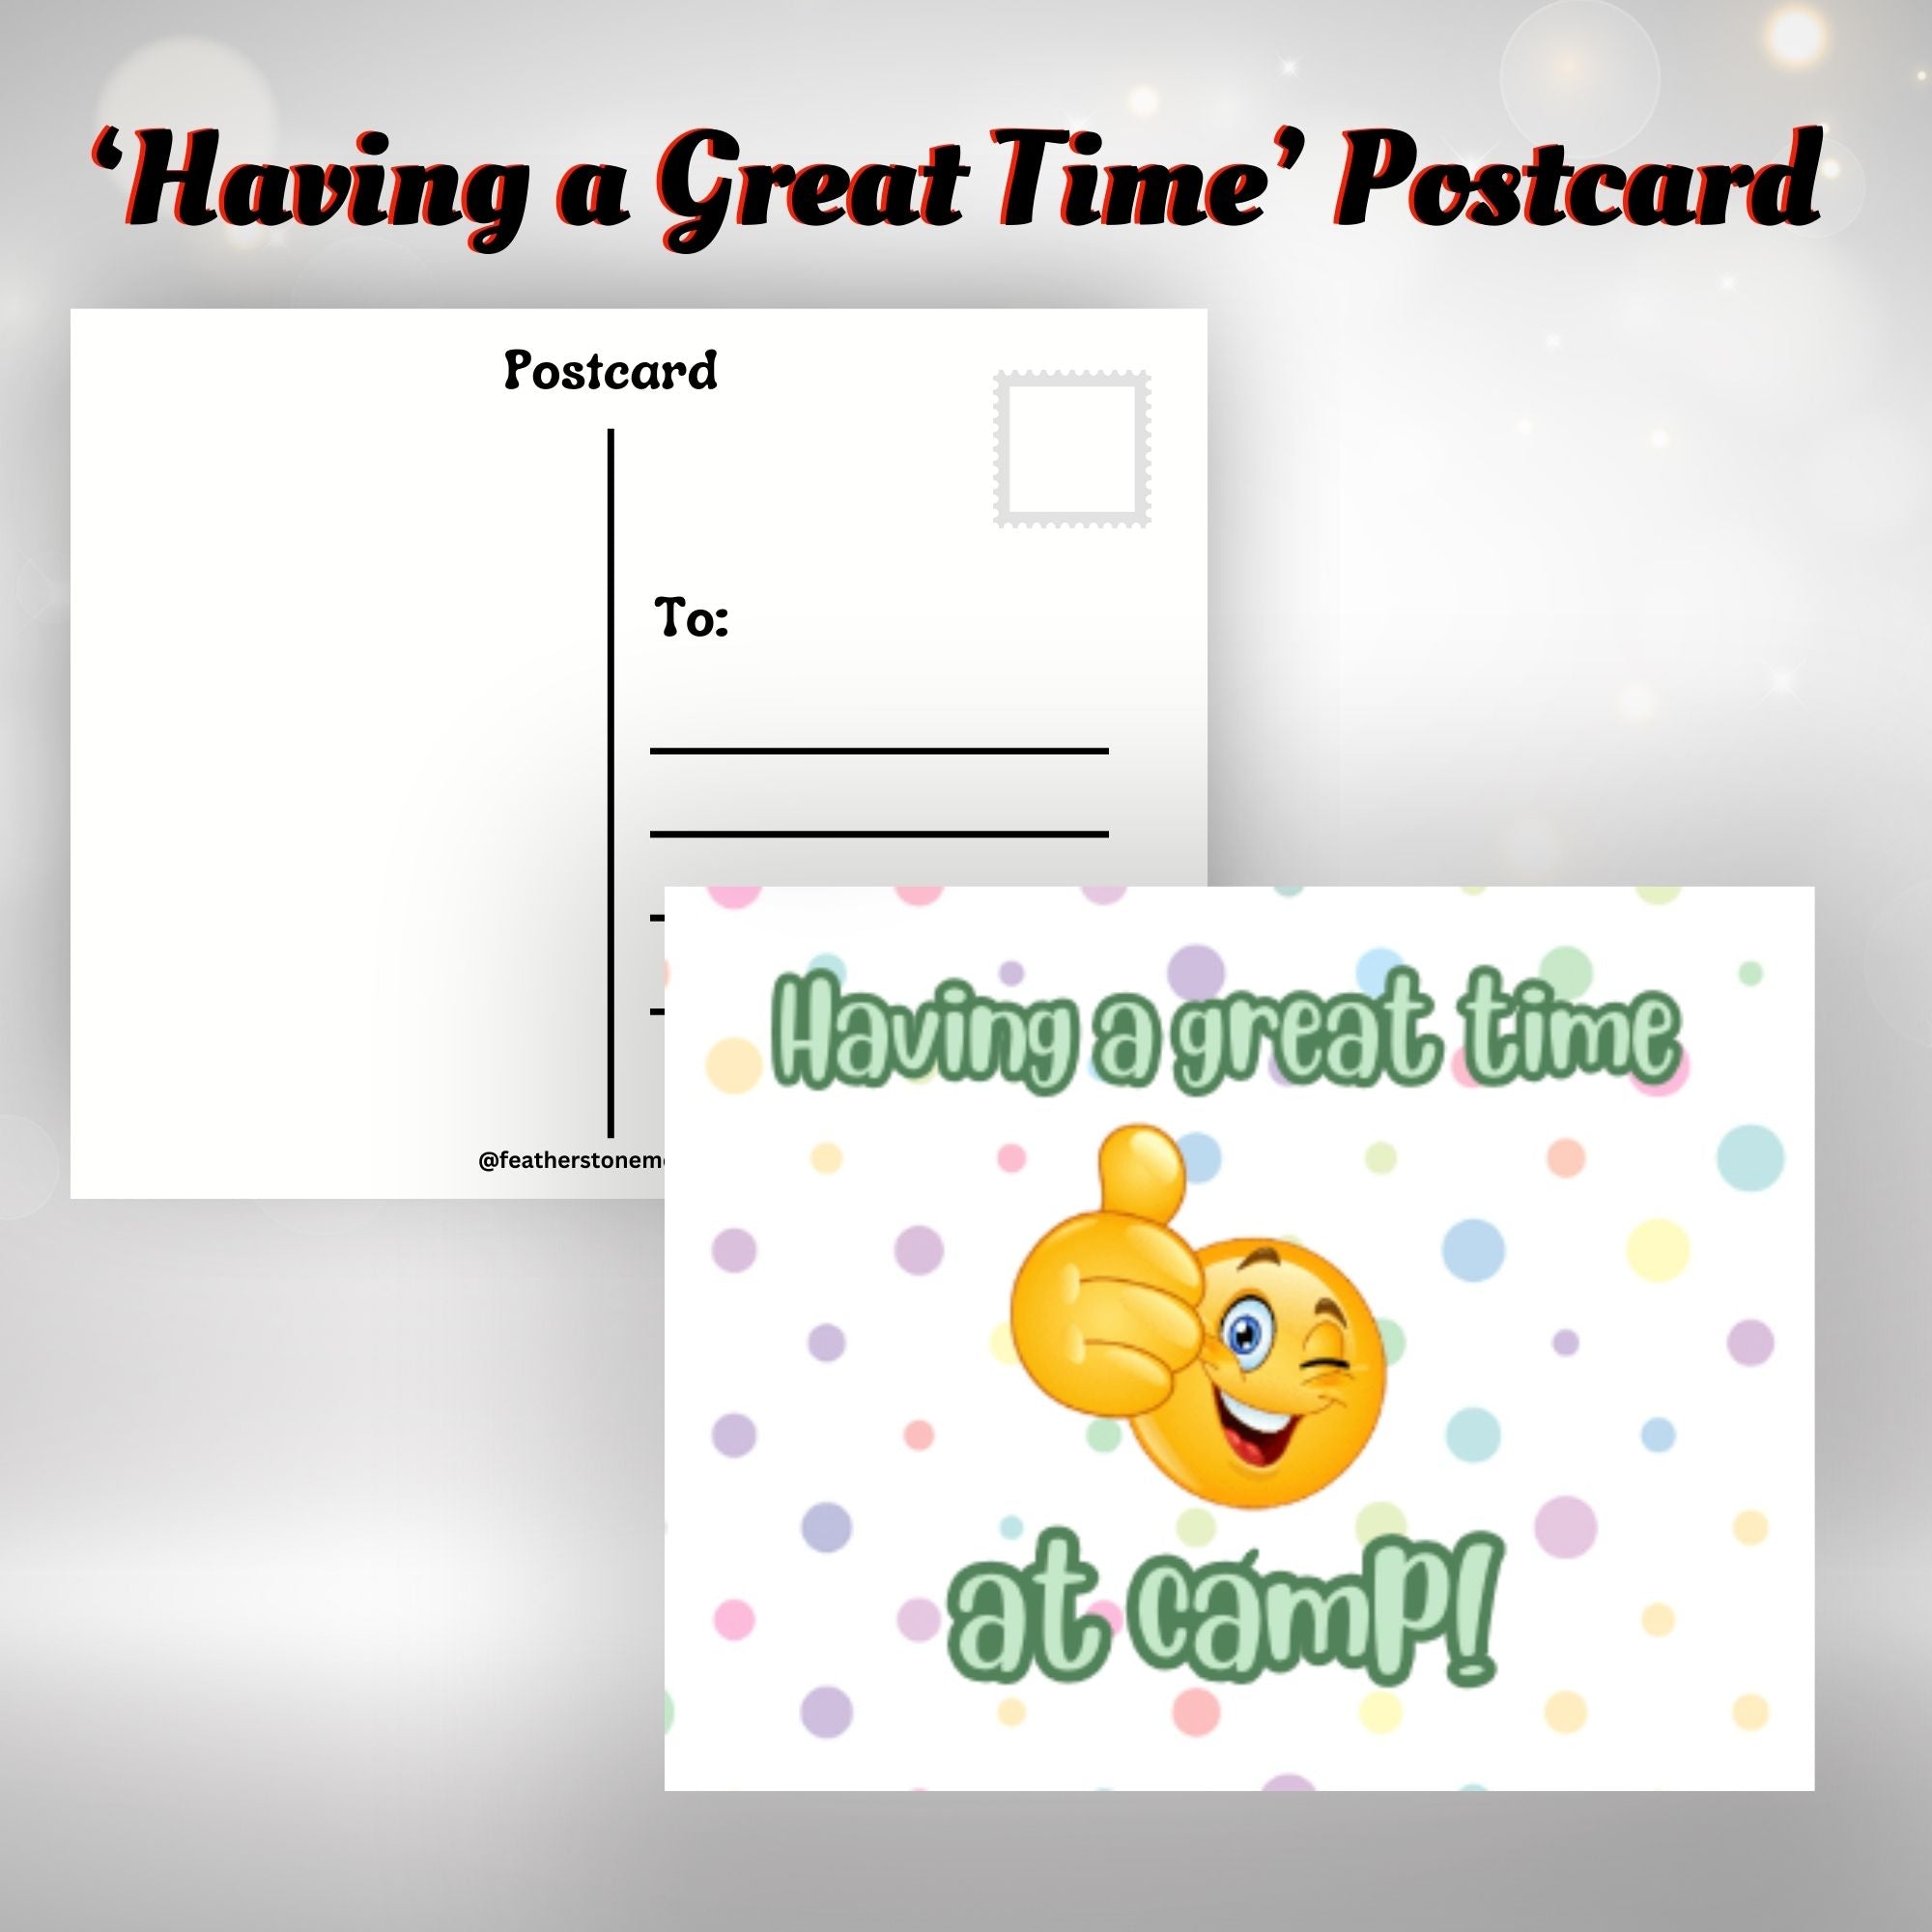 This image shows the Having a Great Time at Camp! postcard with a winking smiley face giving a thumbs up.